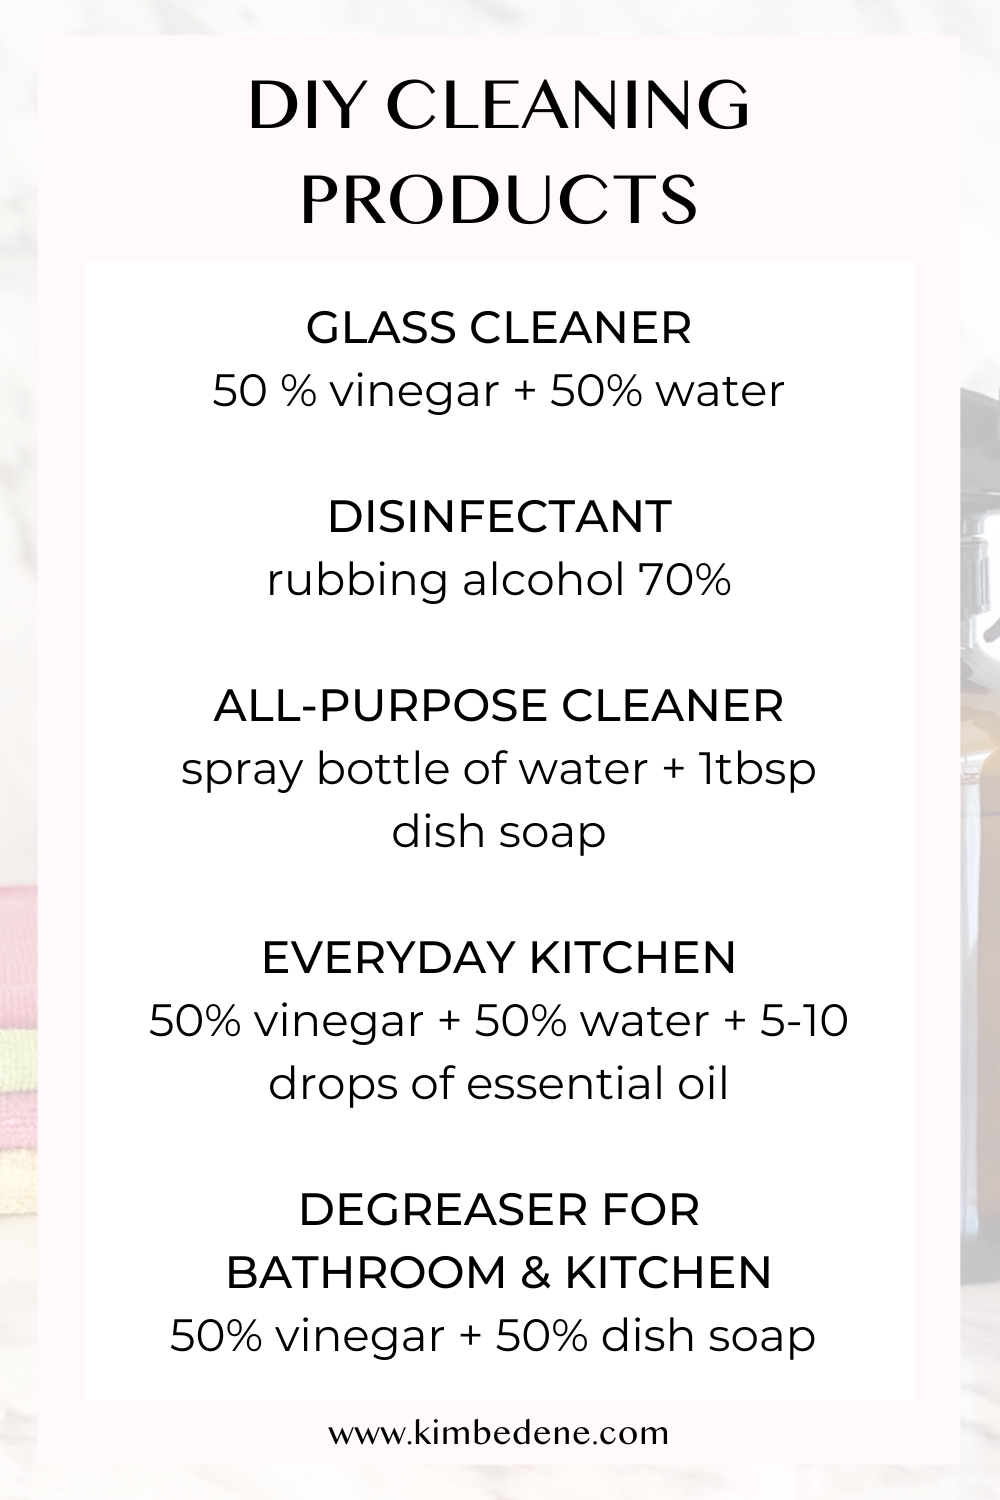 https://kimbedene.com/wp-content/uploads/2019/06/Minimalist-cleaning-tips-PIN-2.png